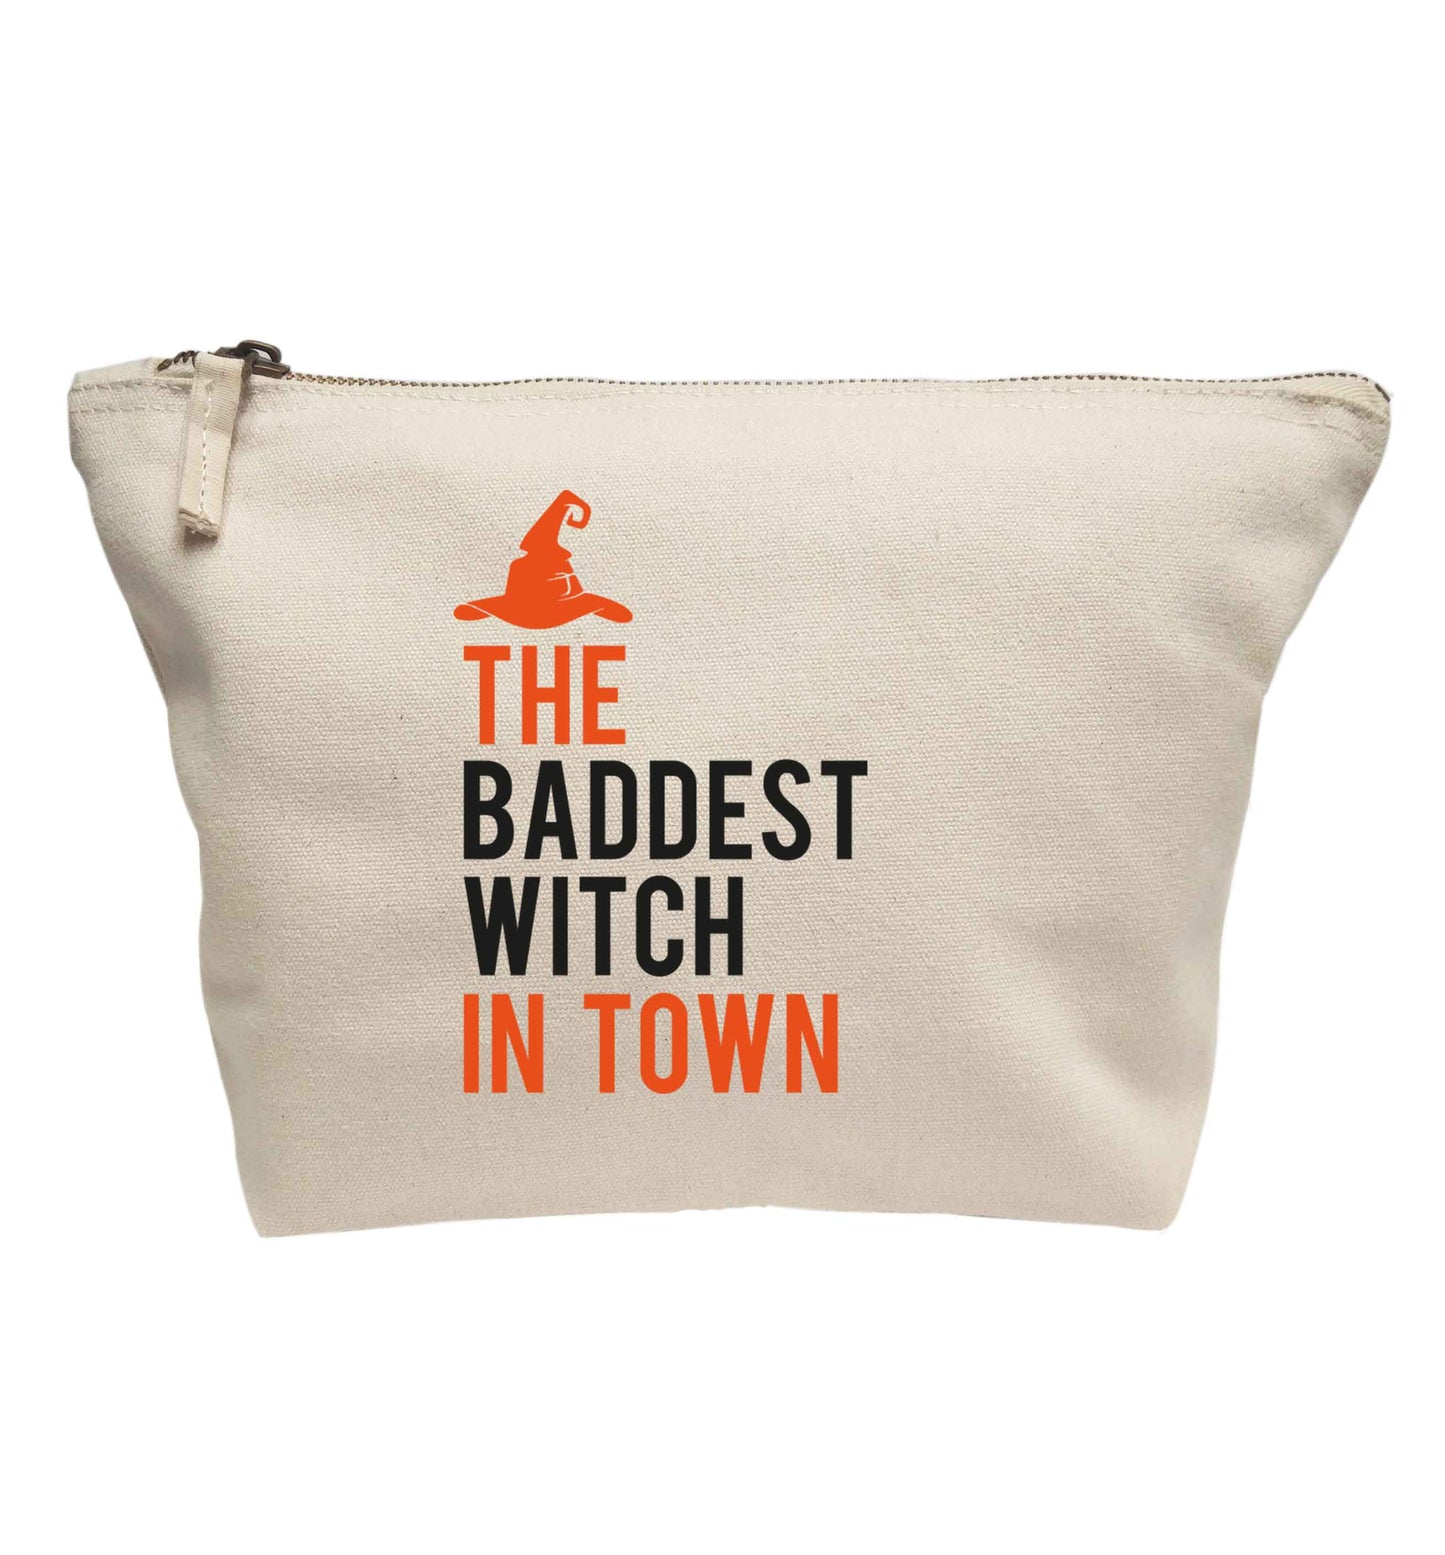 Badest witch in town | Makeup / wash bag